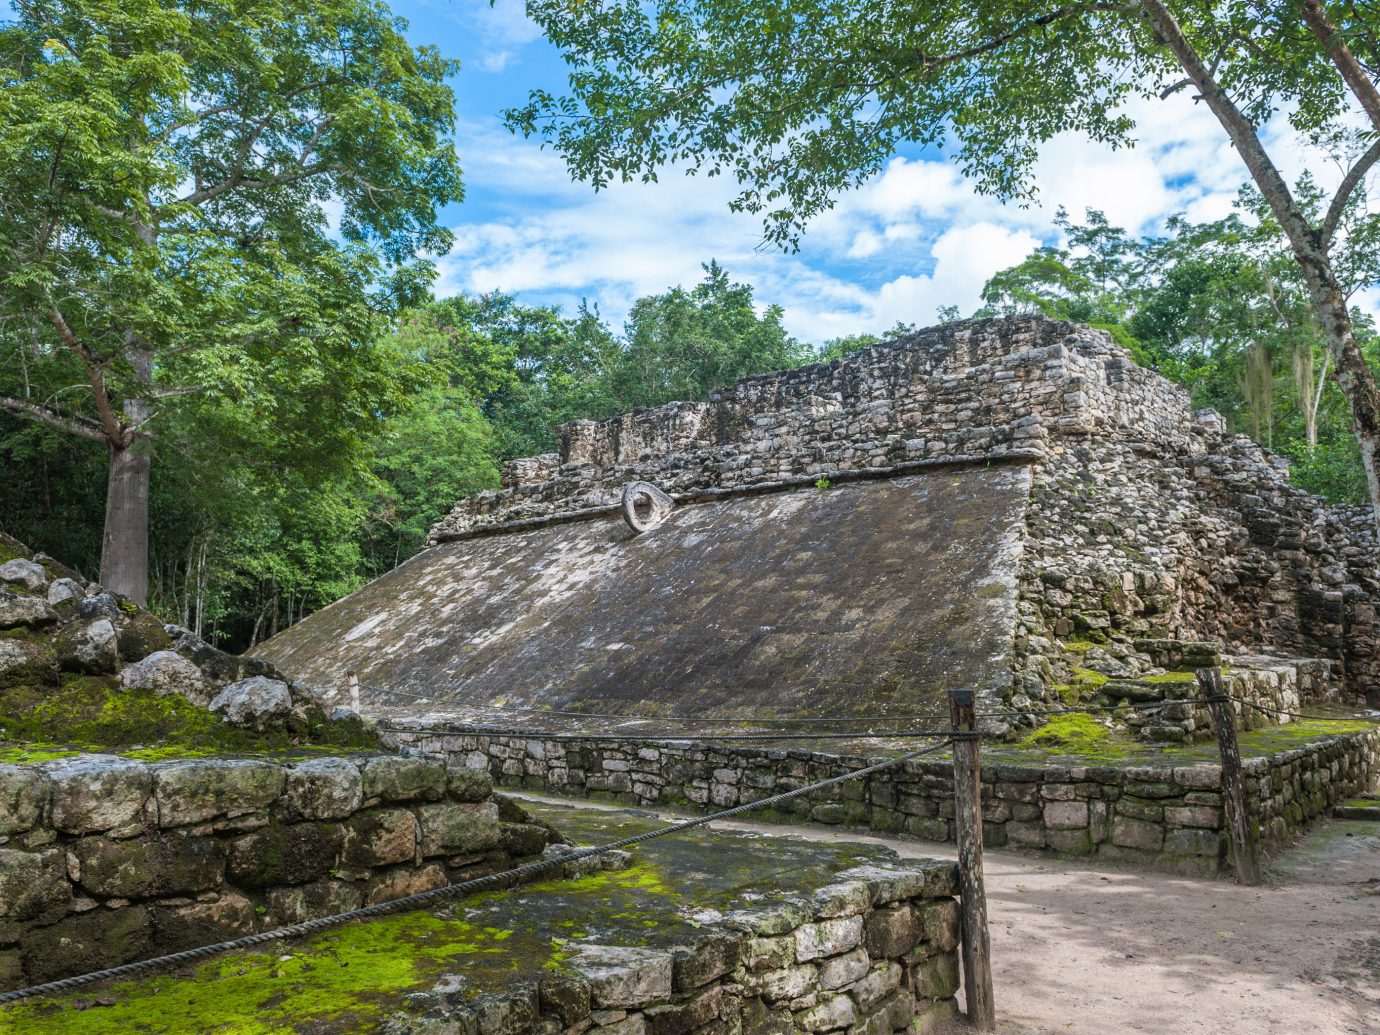 City Mexico Trip Ideas Tulum tree outdoor rock archaeological site stone Ruins ancient history outcrop maya civilization stone wall landscape plant maya city Jungle old area surrounded